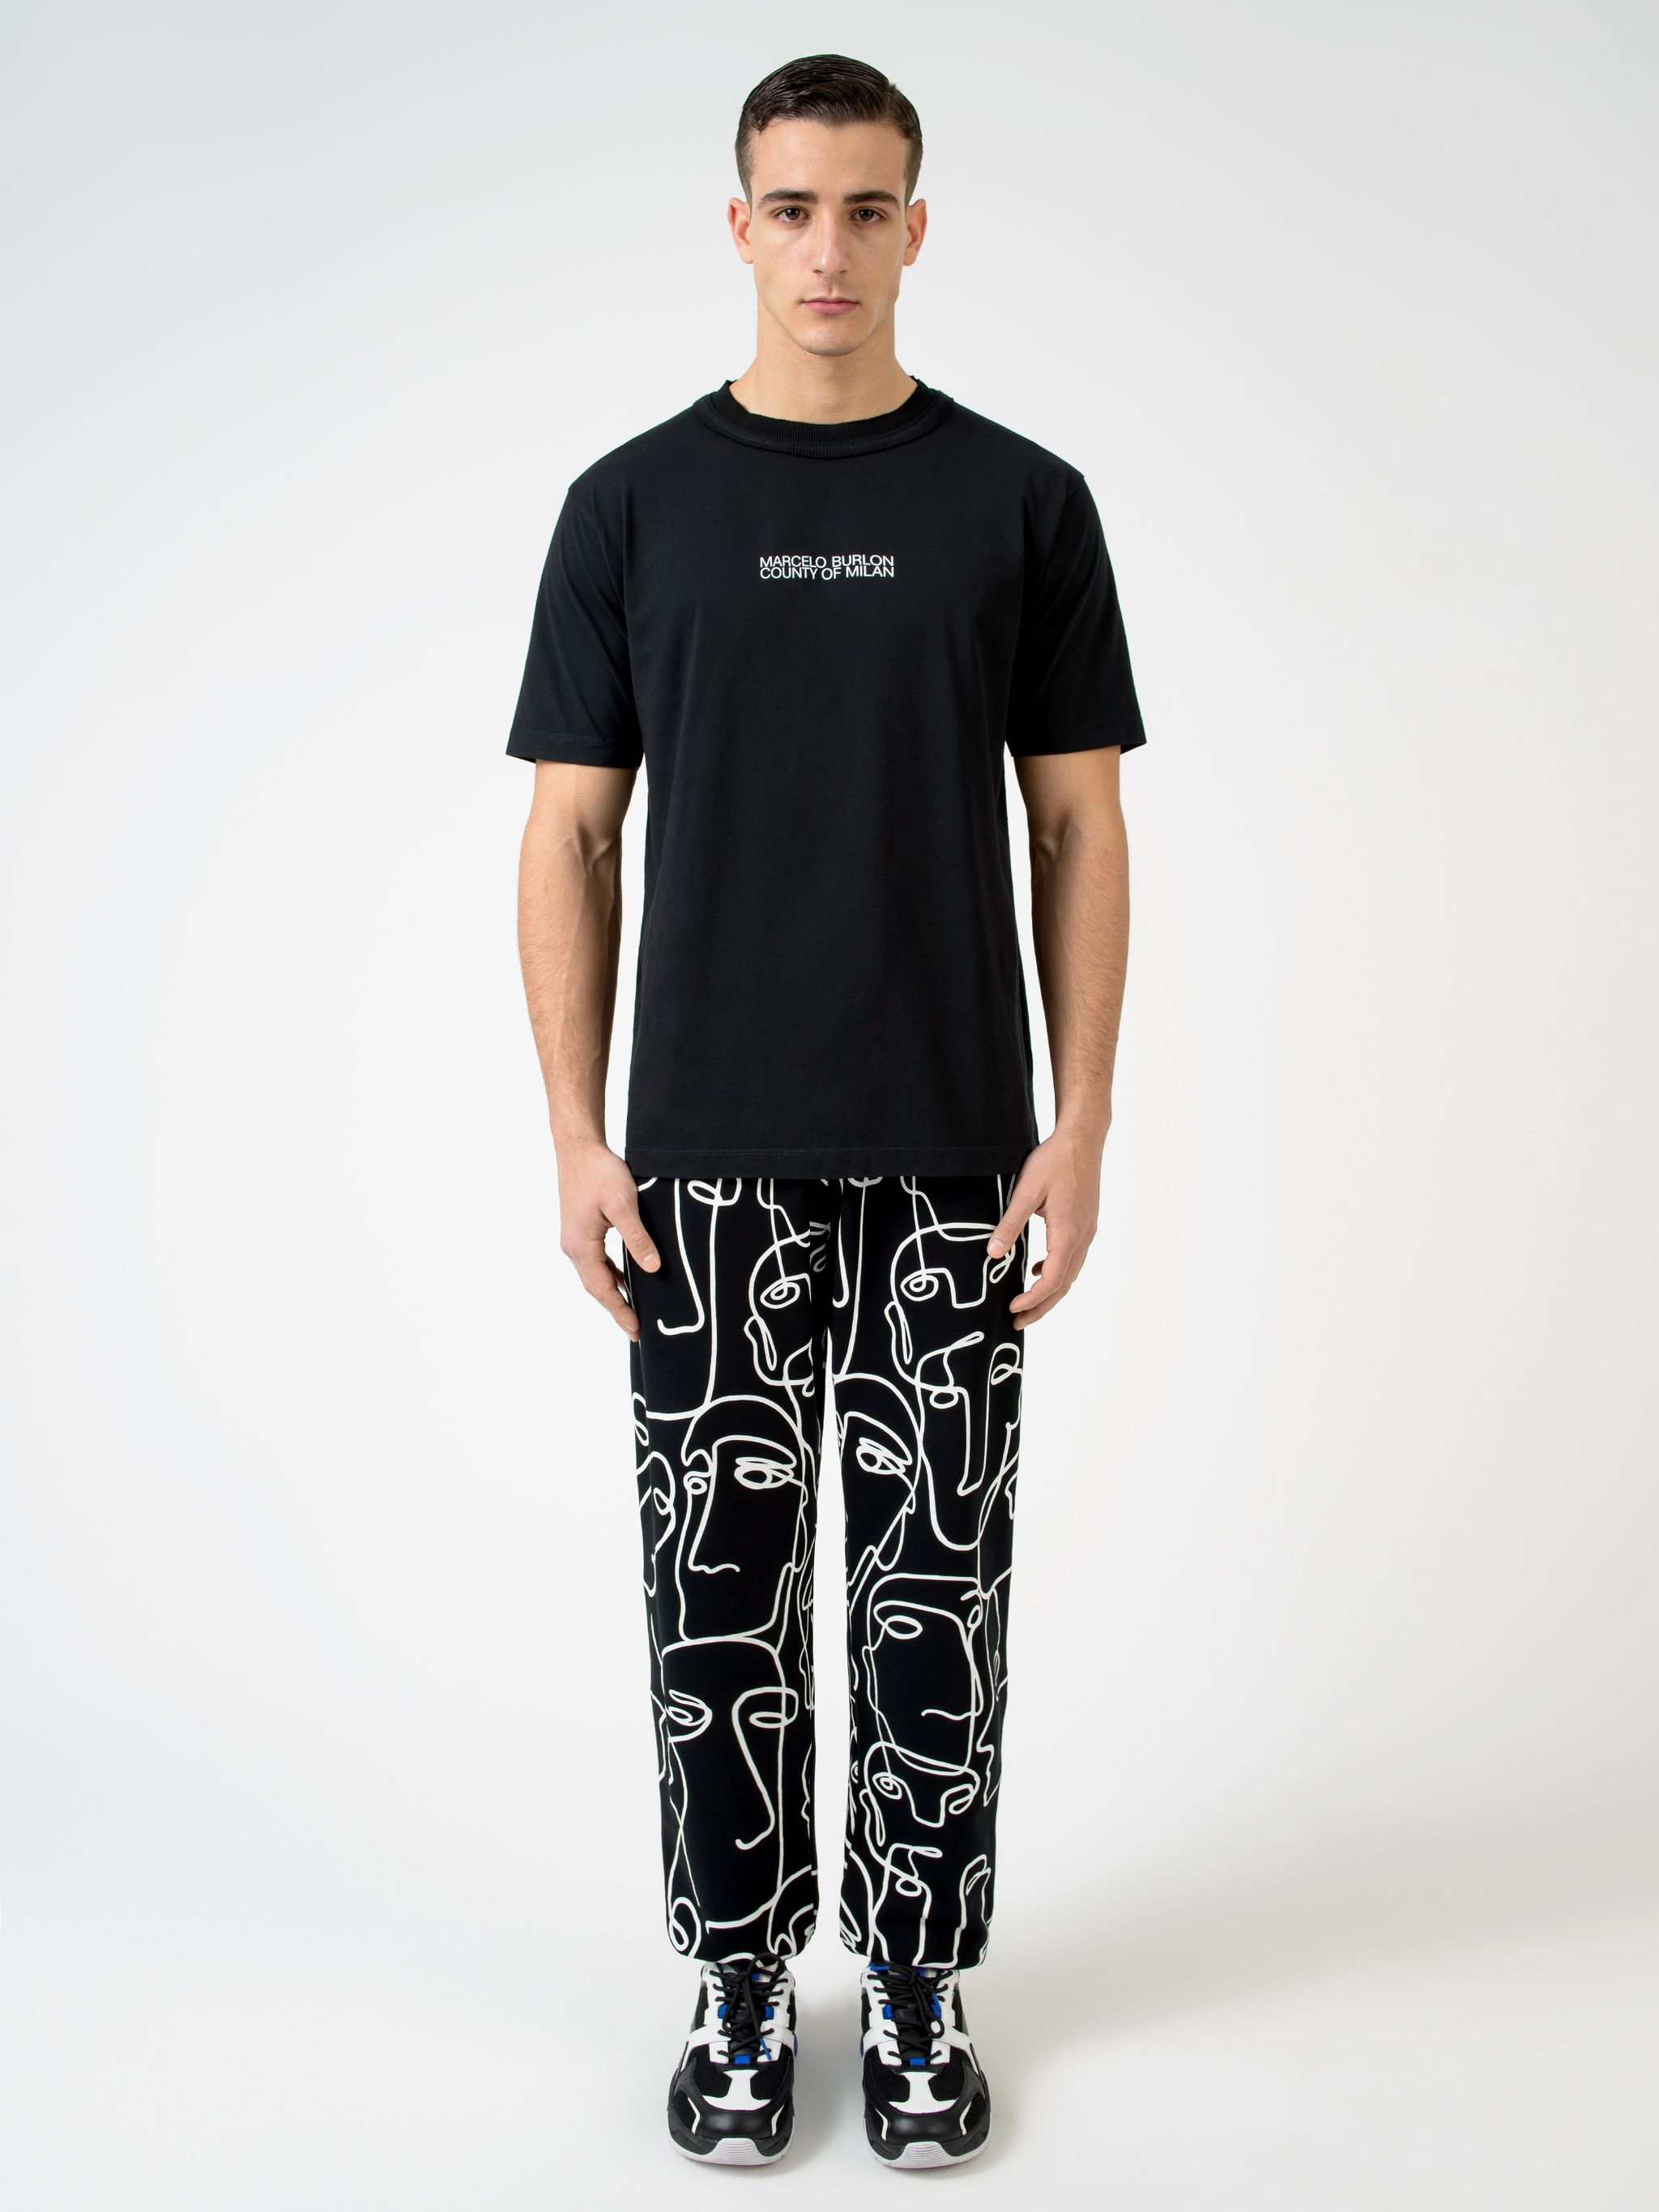 black cotton logo print to the front graphic print to the rear crew neck short sleeves straight hem